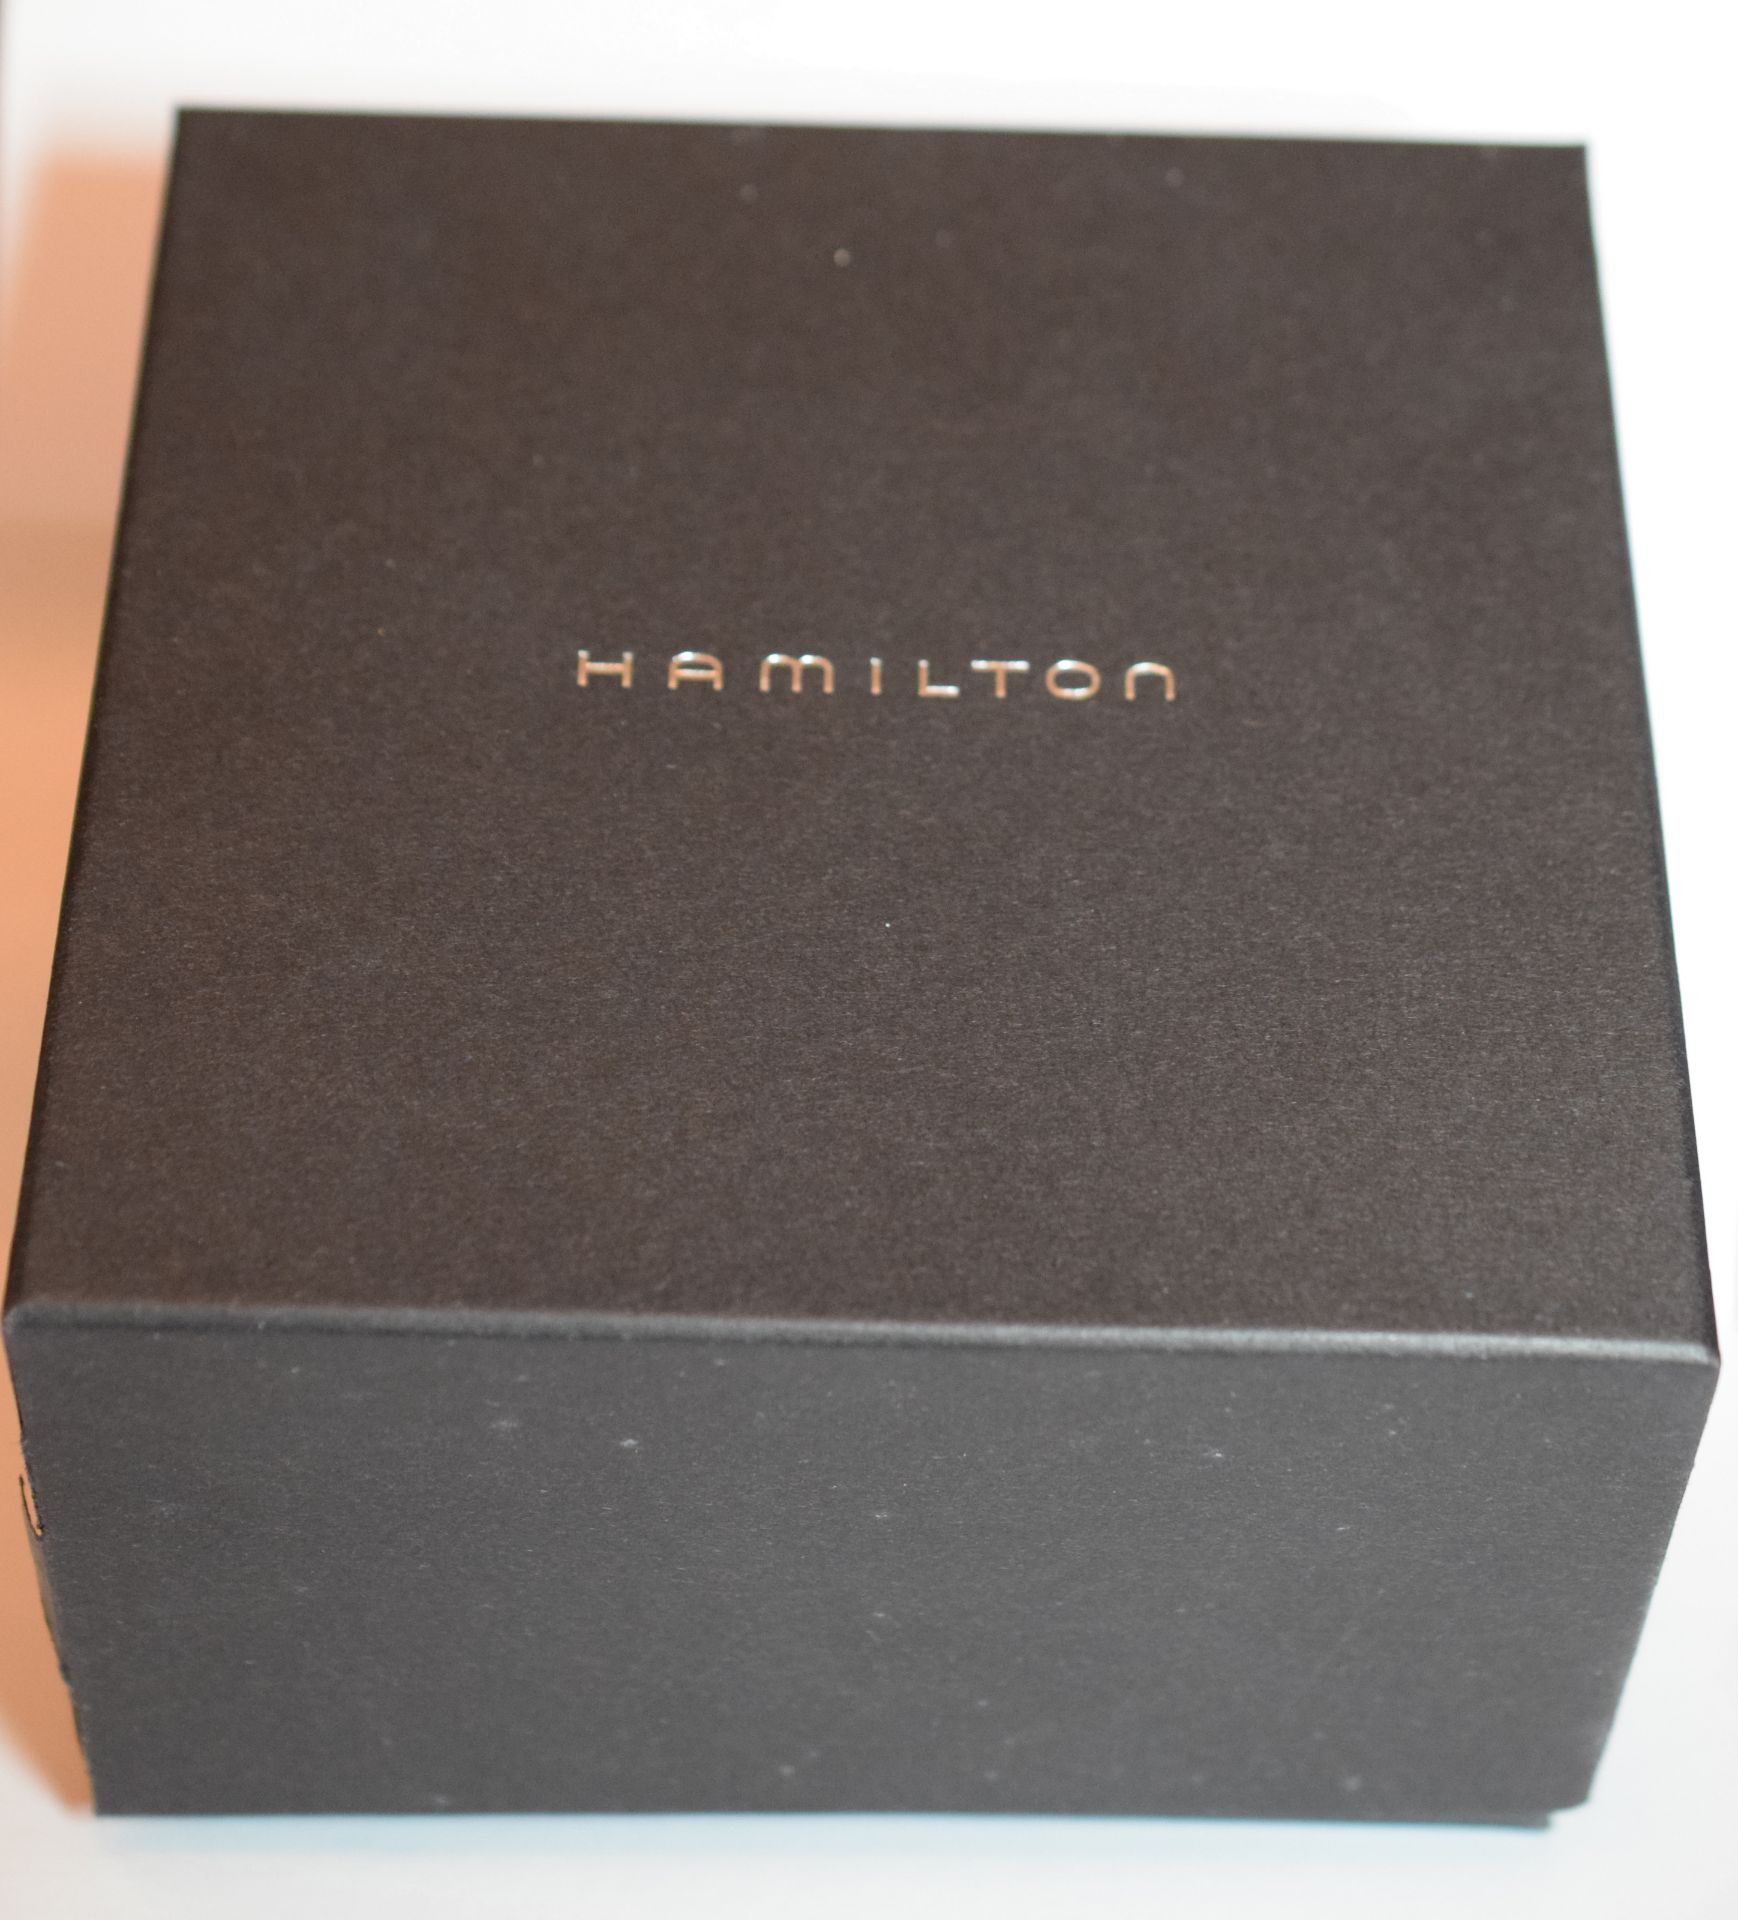 Hamilton GS Tropicalized (GS = General Services) Military Watch - Image 10 of 10